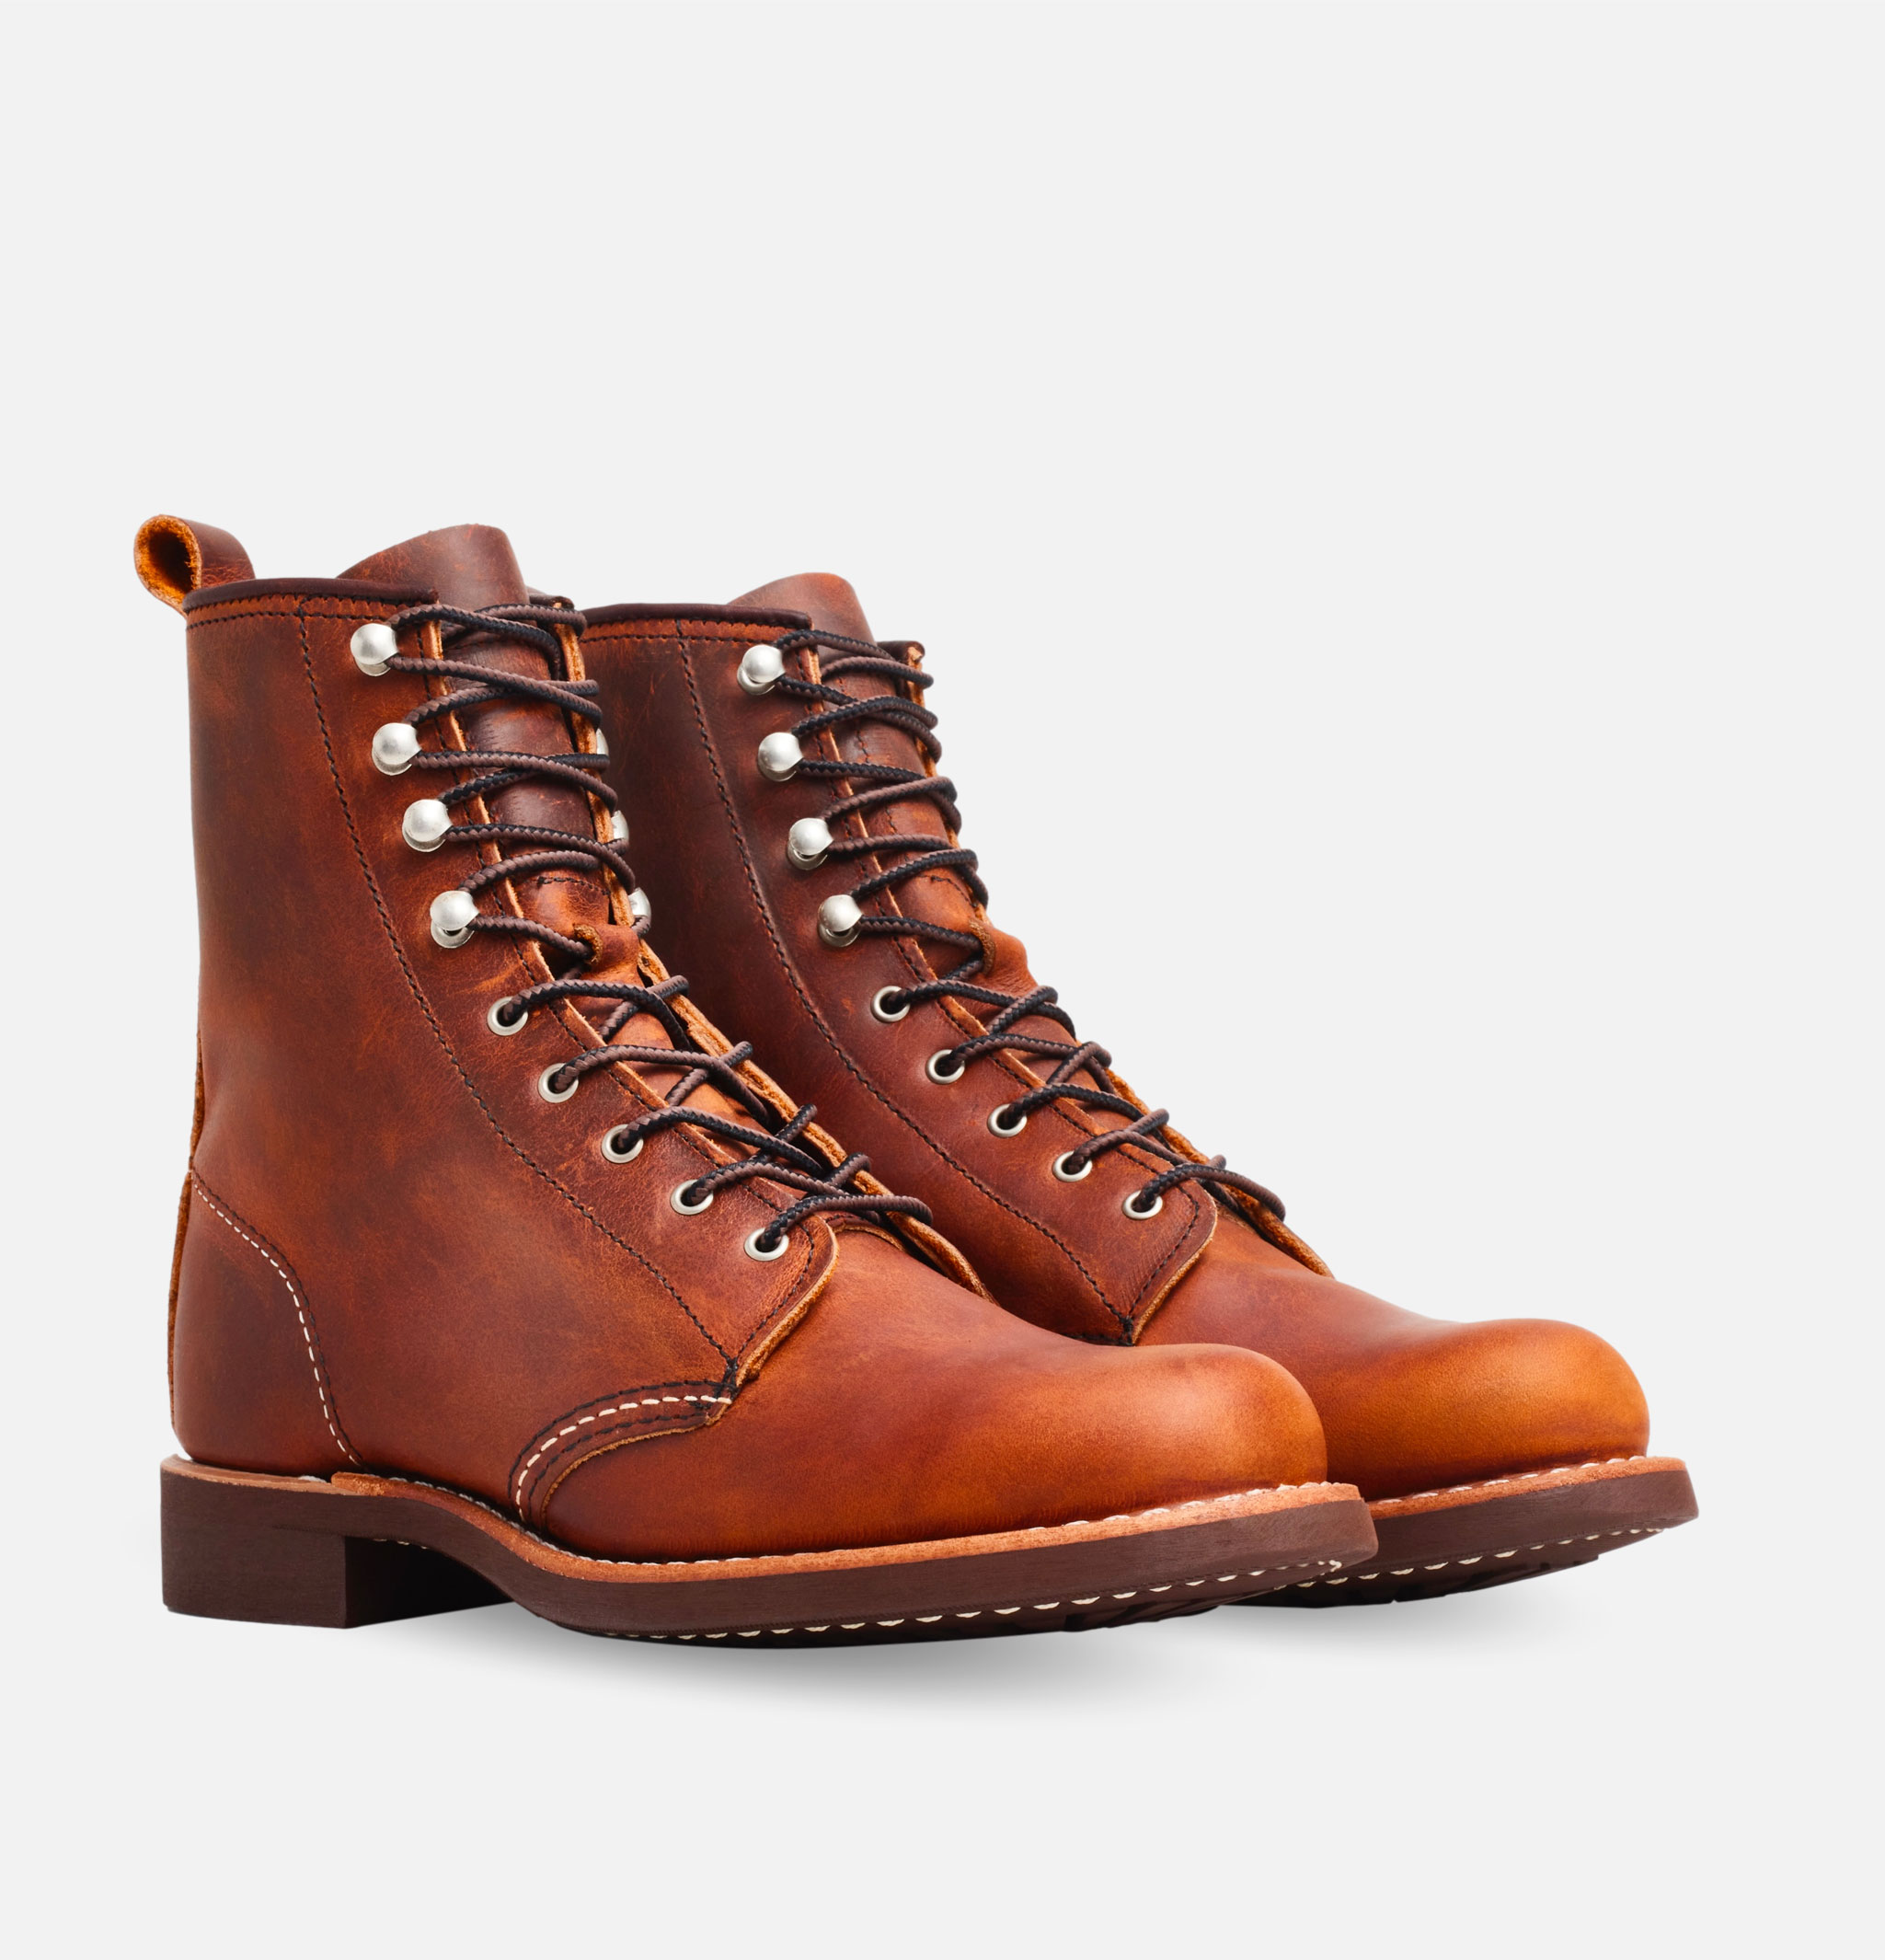 Red Wing Shoes Woman - 3362 - Silversmith Copper